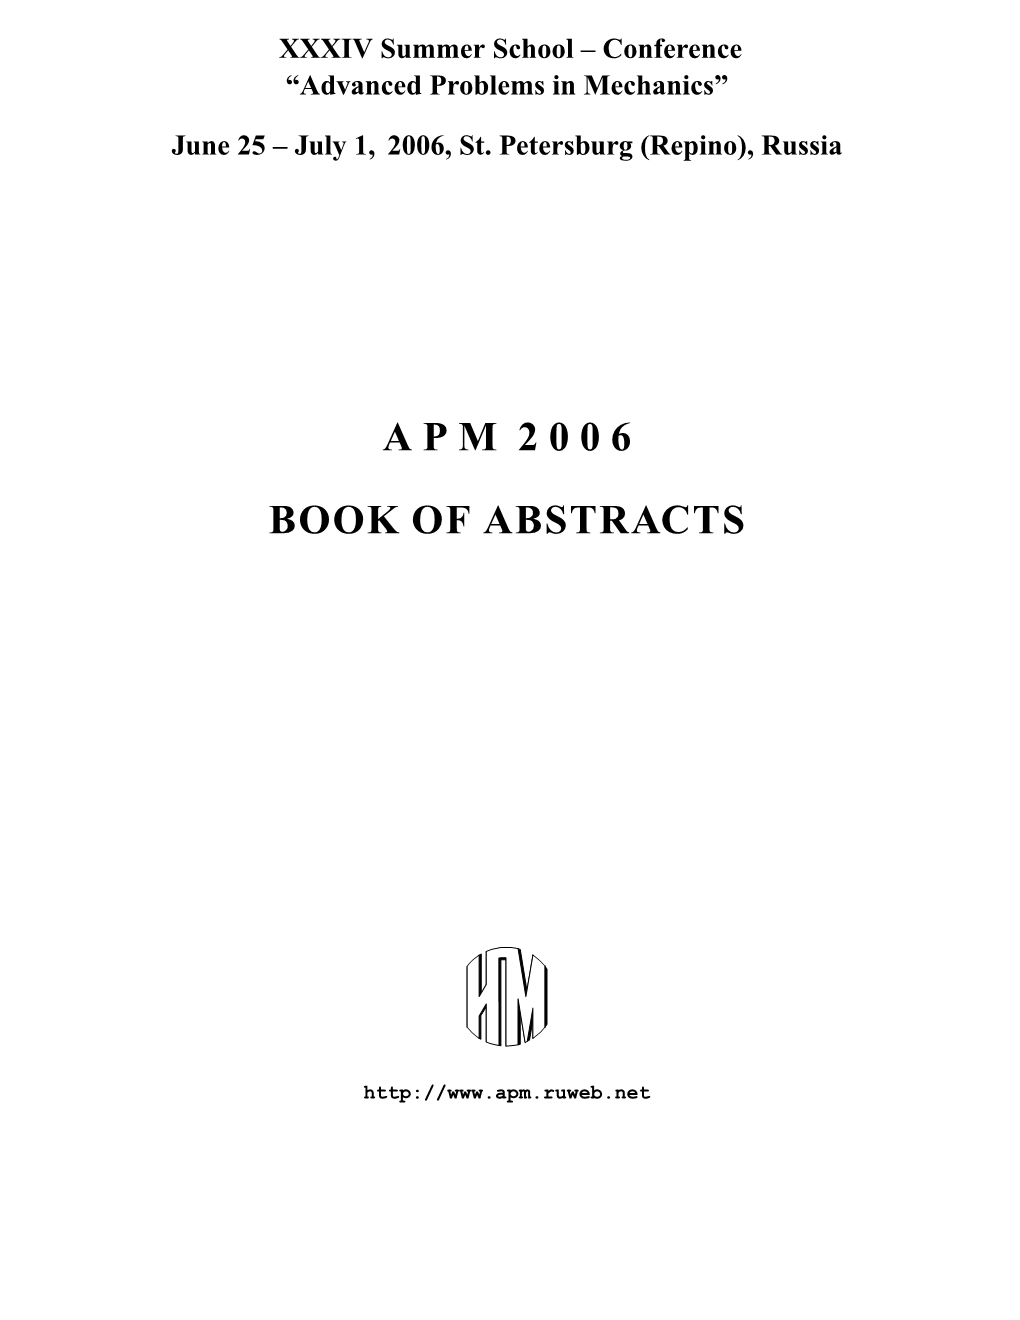 Apm 2006 Book of Abstracts